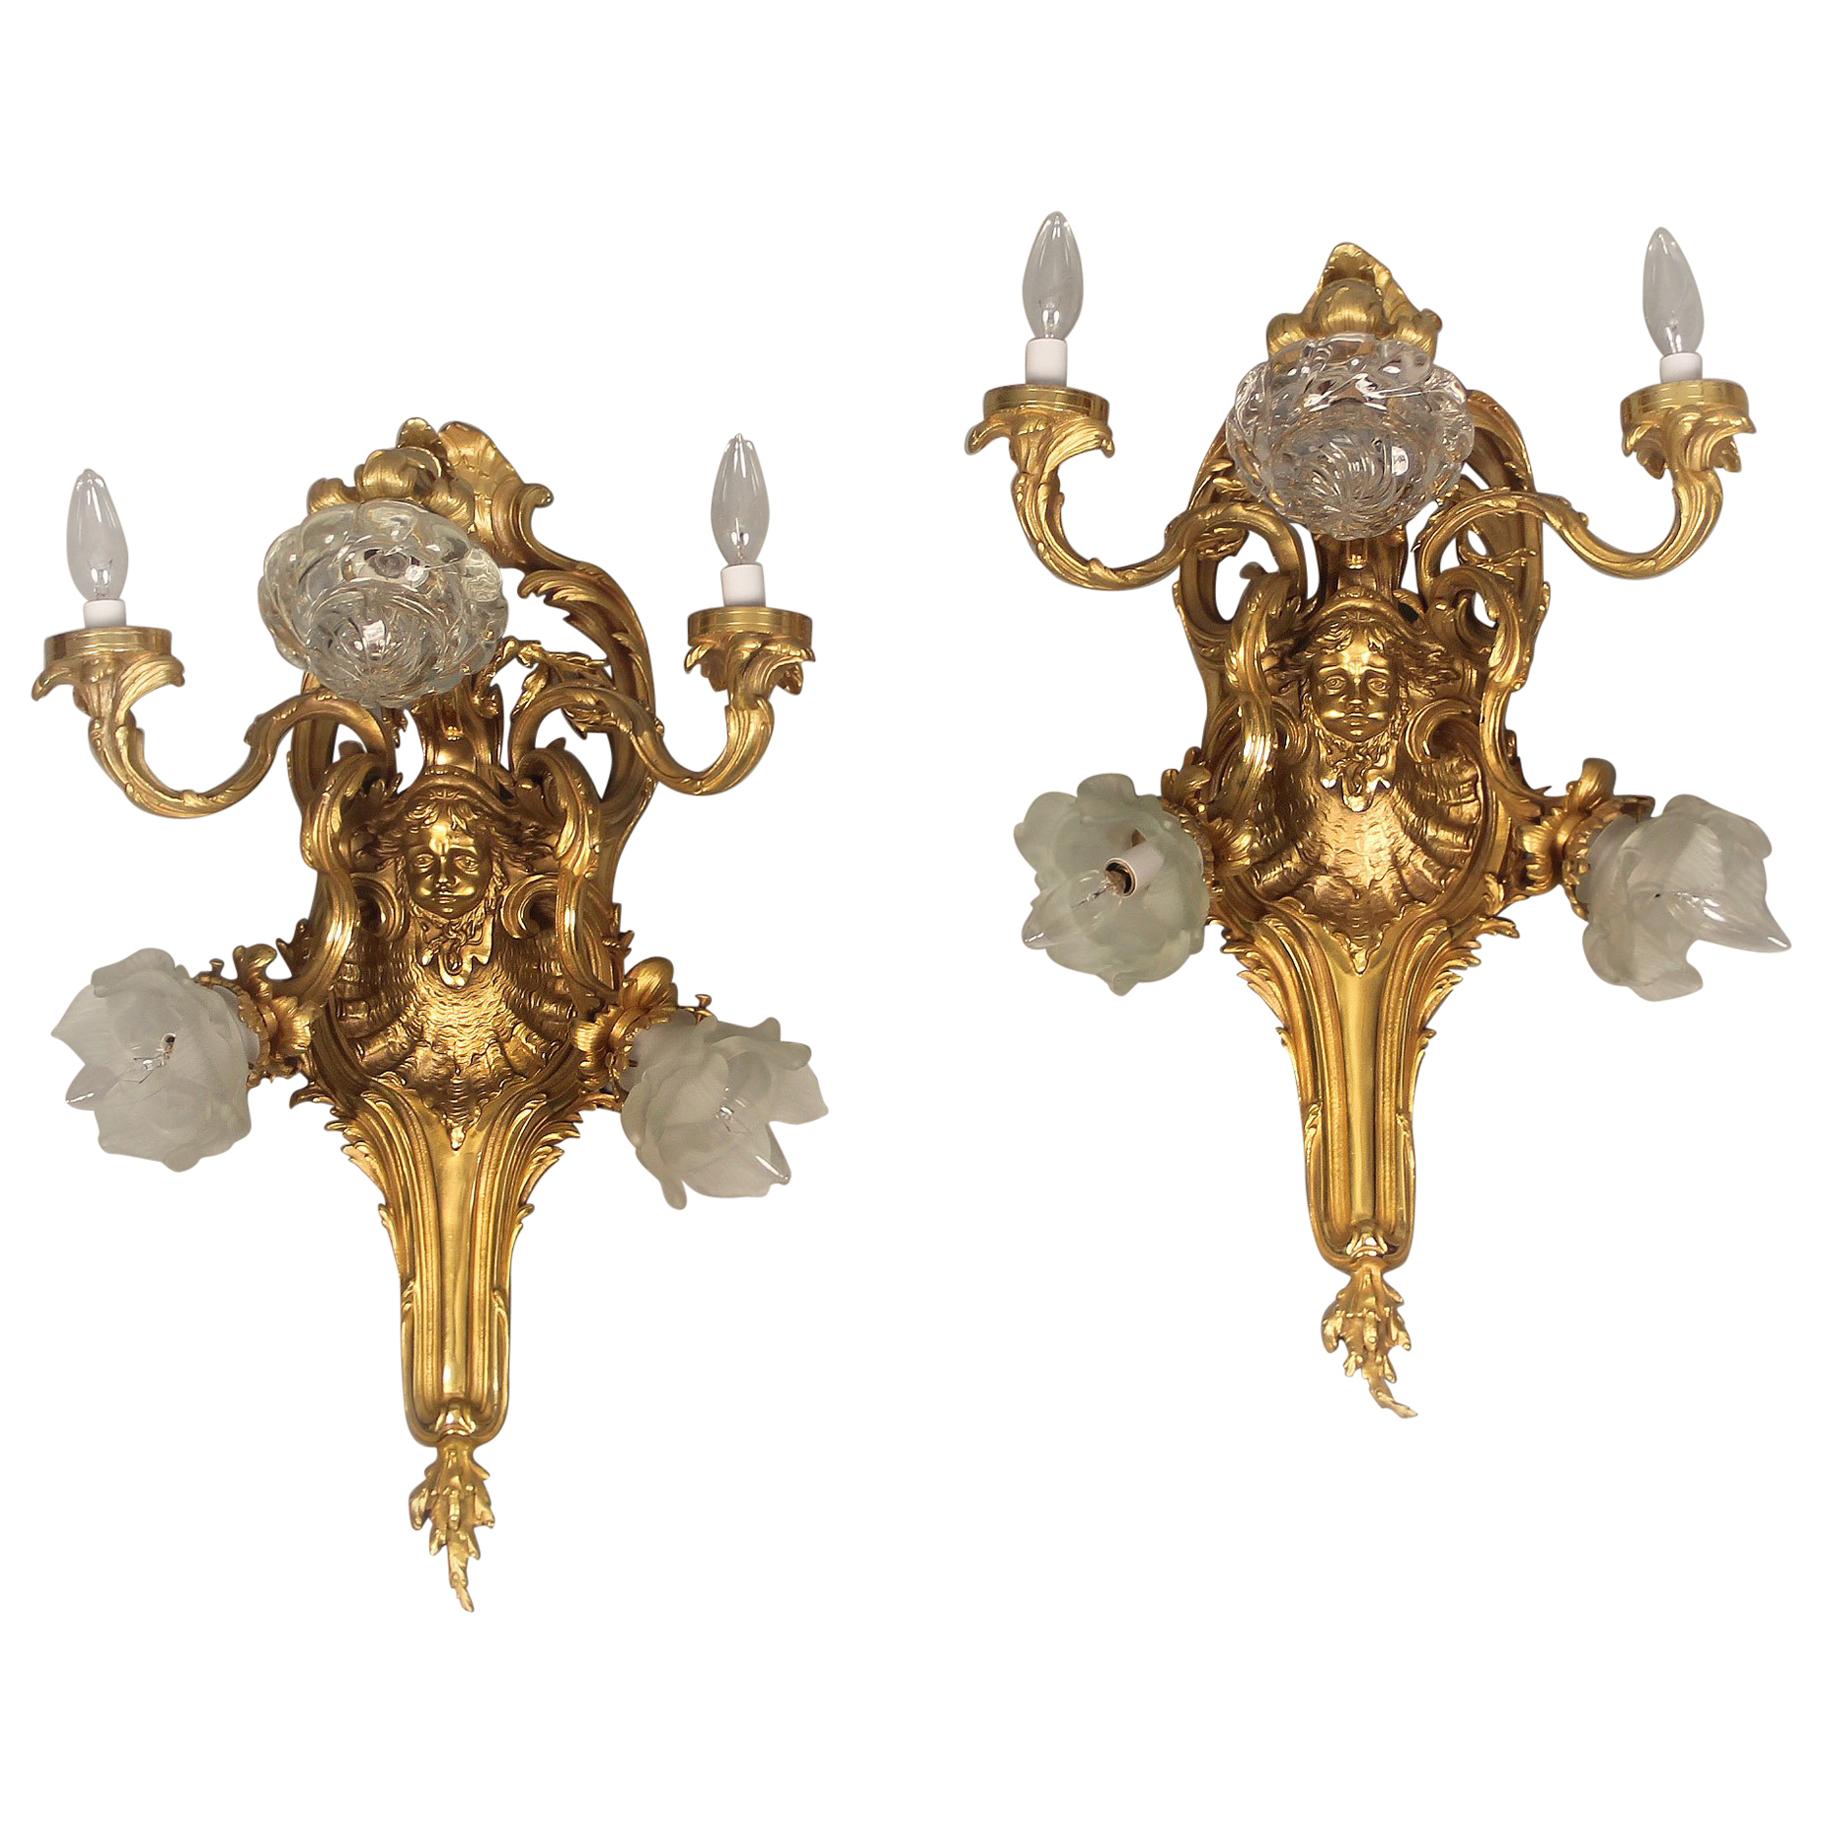 Pair of Late 19th-Early 20th Century Gilt Bronze Five-Light Sconces